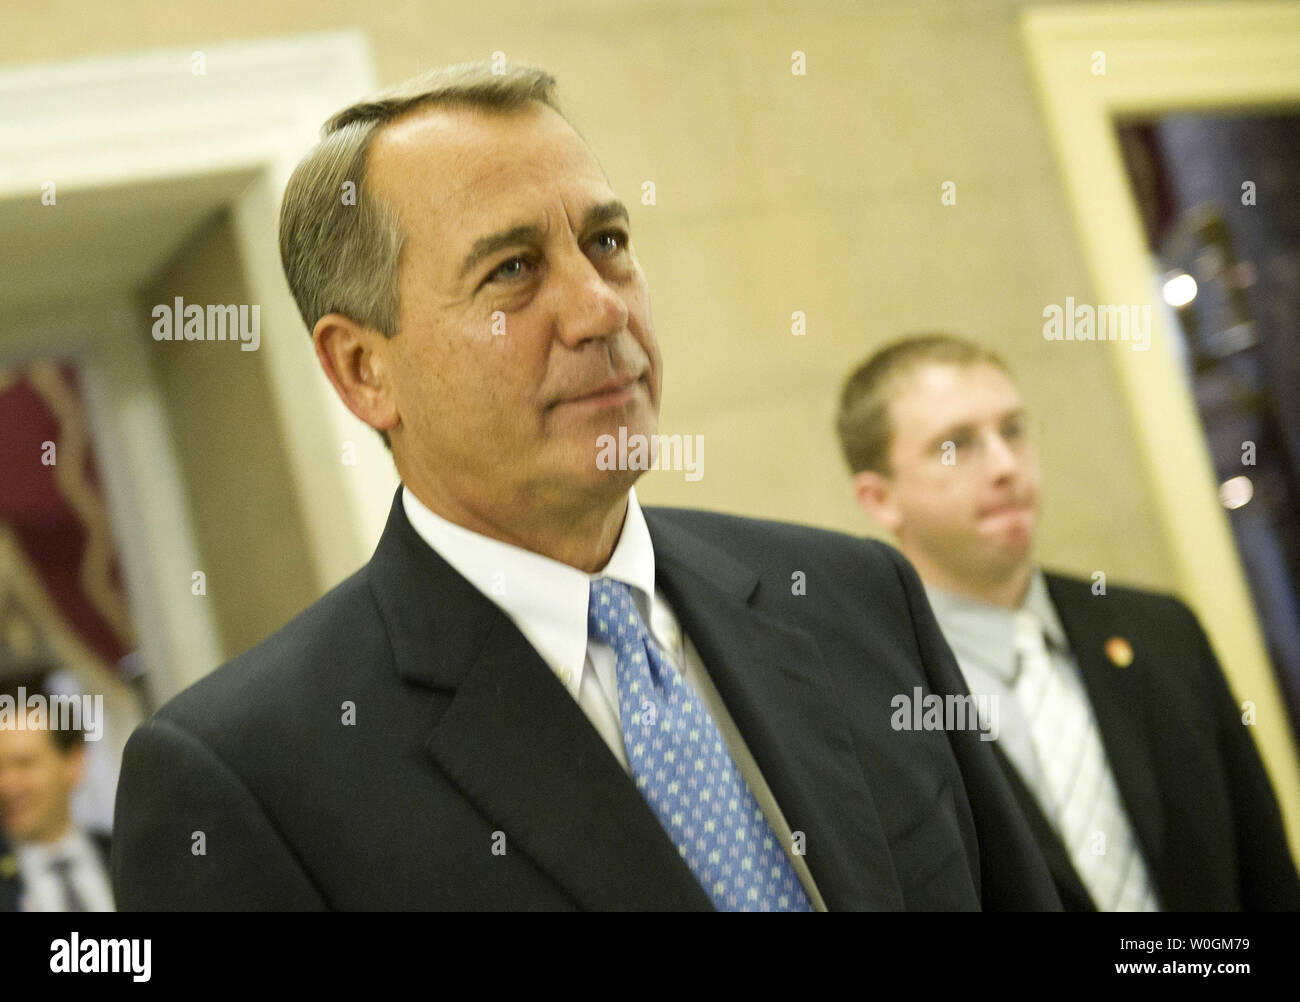 Speaker of the House John Boehner (R-OH) walks back to his office after voting on the House floor in the U.S. Capitol Building in Washington on December 20, 2011.  UPI/Kevin Dietsch Stock Photo